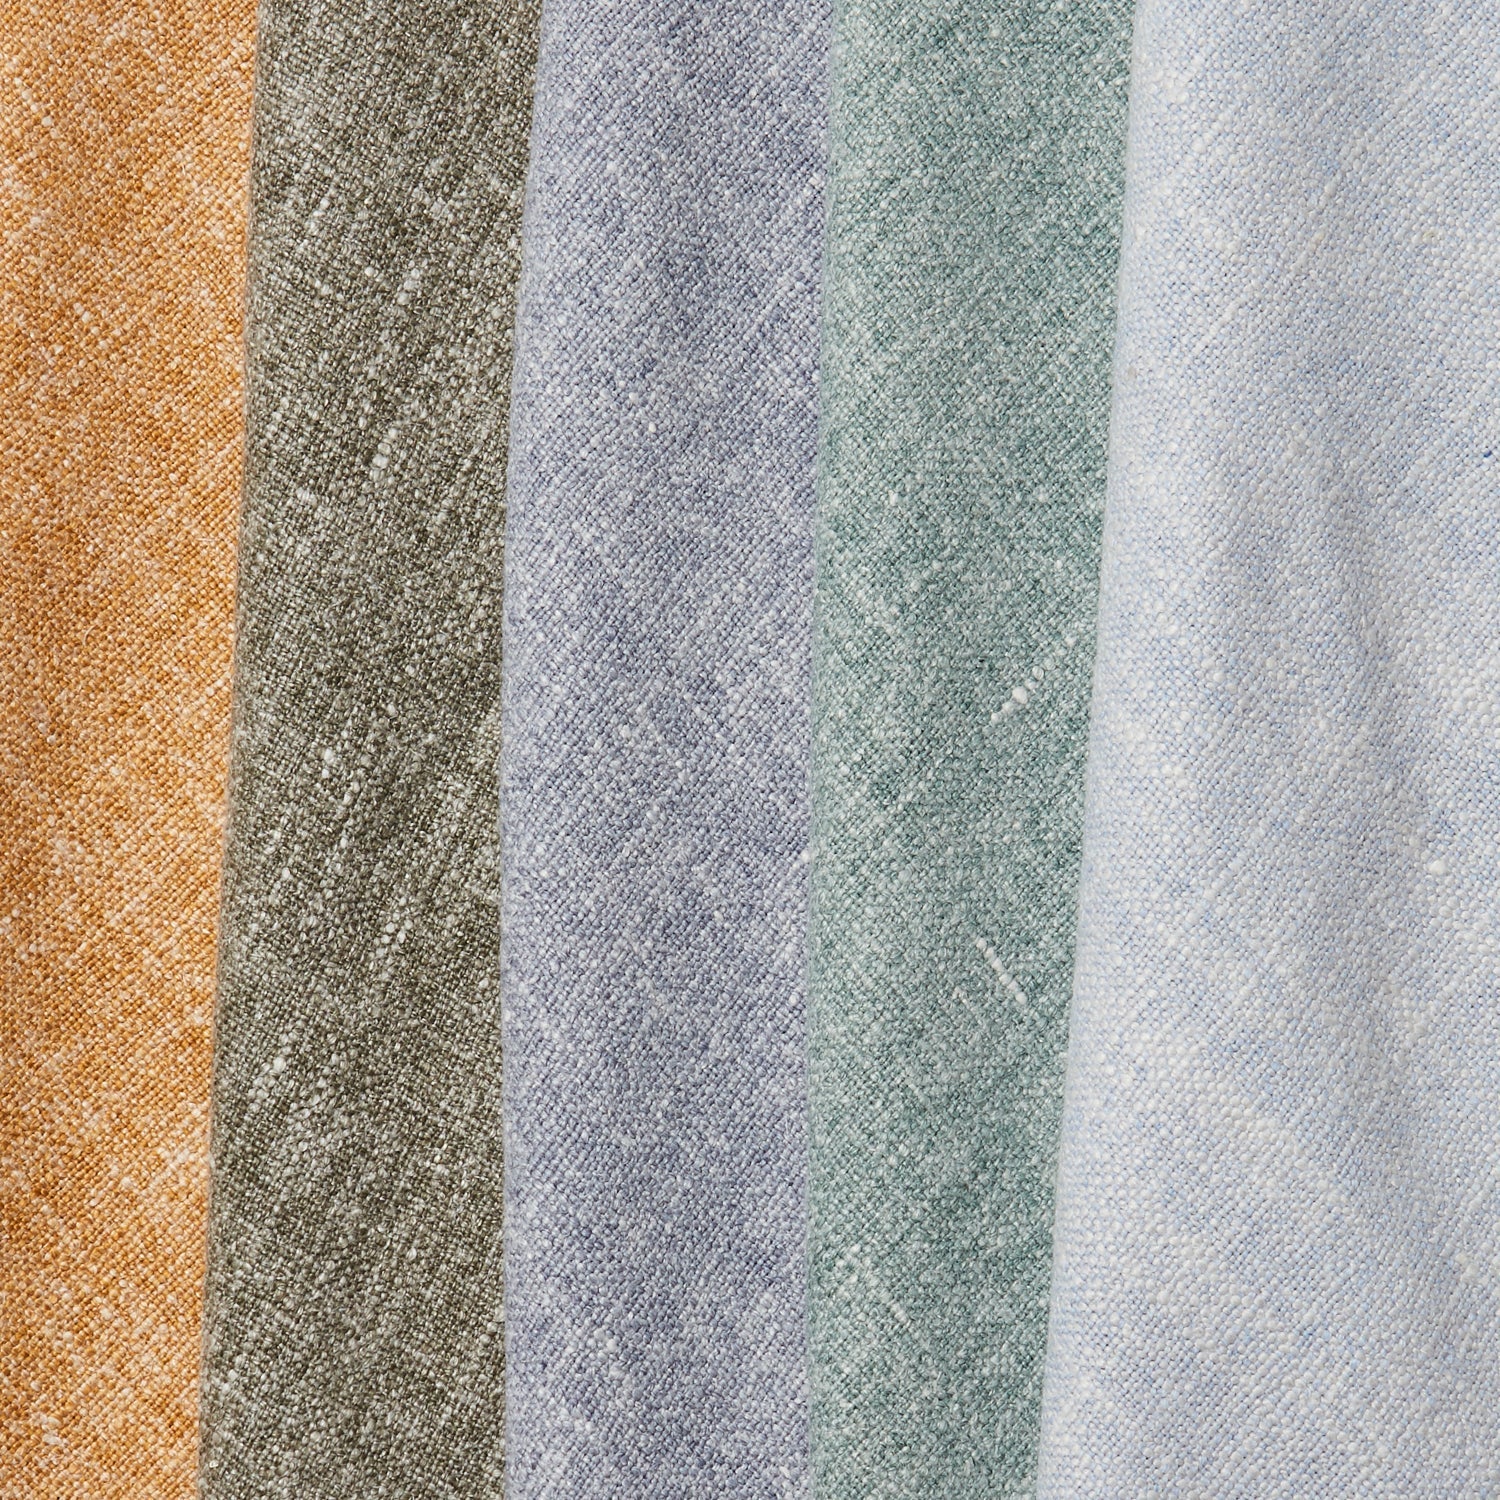 A row of folded linen swatches in mottled shades of blue, green, gray, brown and mustard.